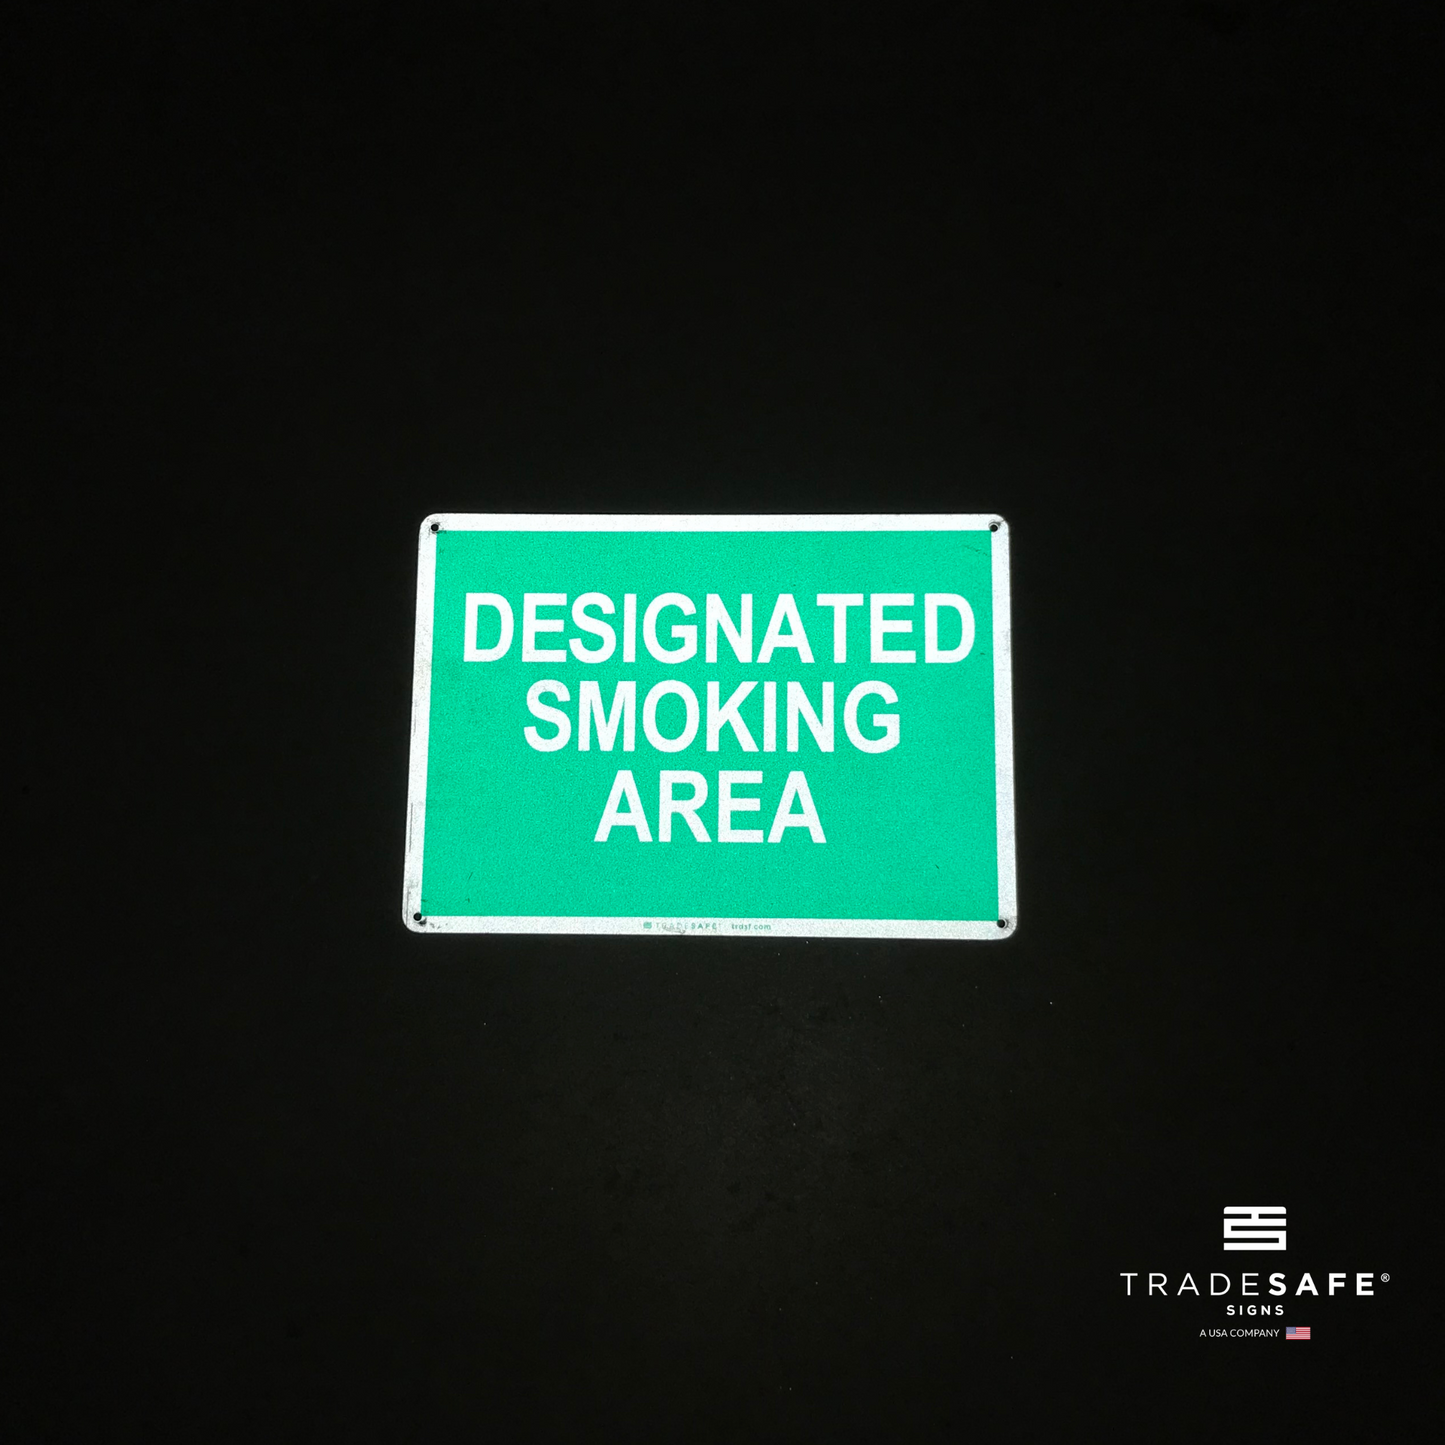 reflective attribute of aluminum smoking sign on black background